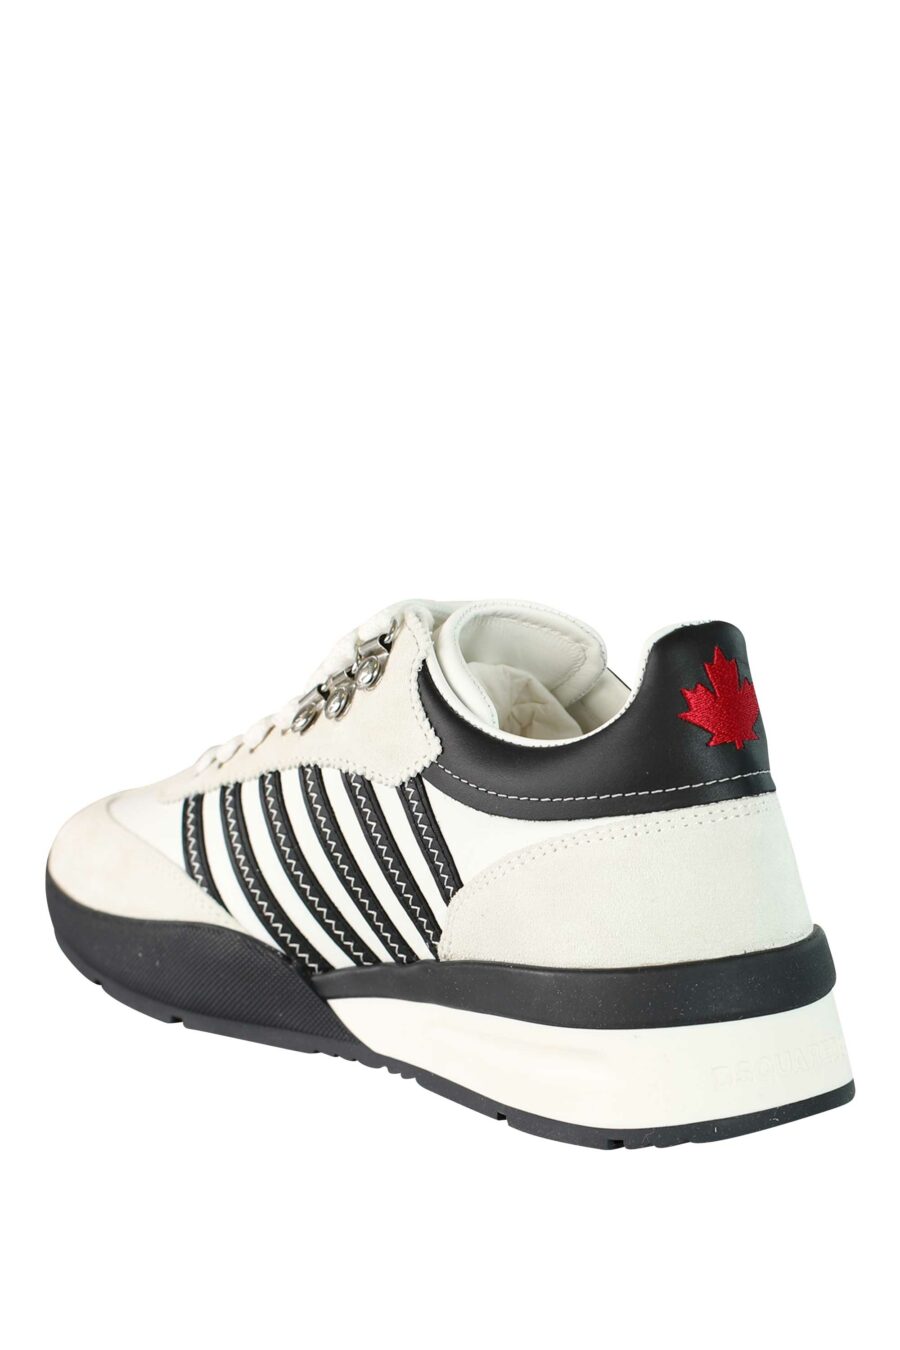 Trainers white mix "original legend" with two-tone sole and diagonal lines - 8055777186879 4